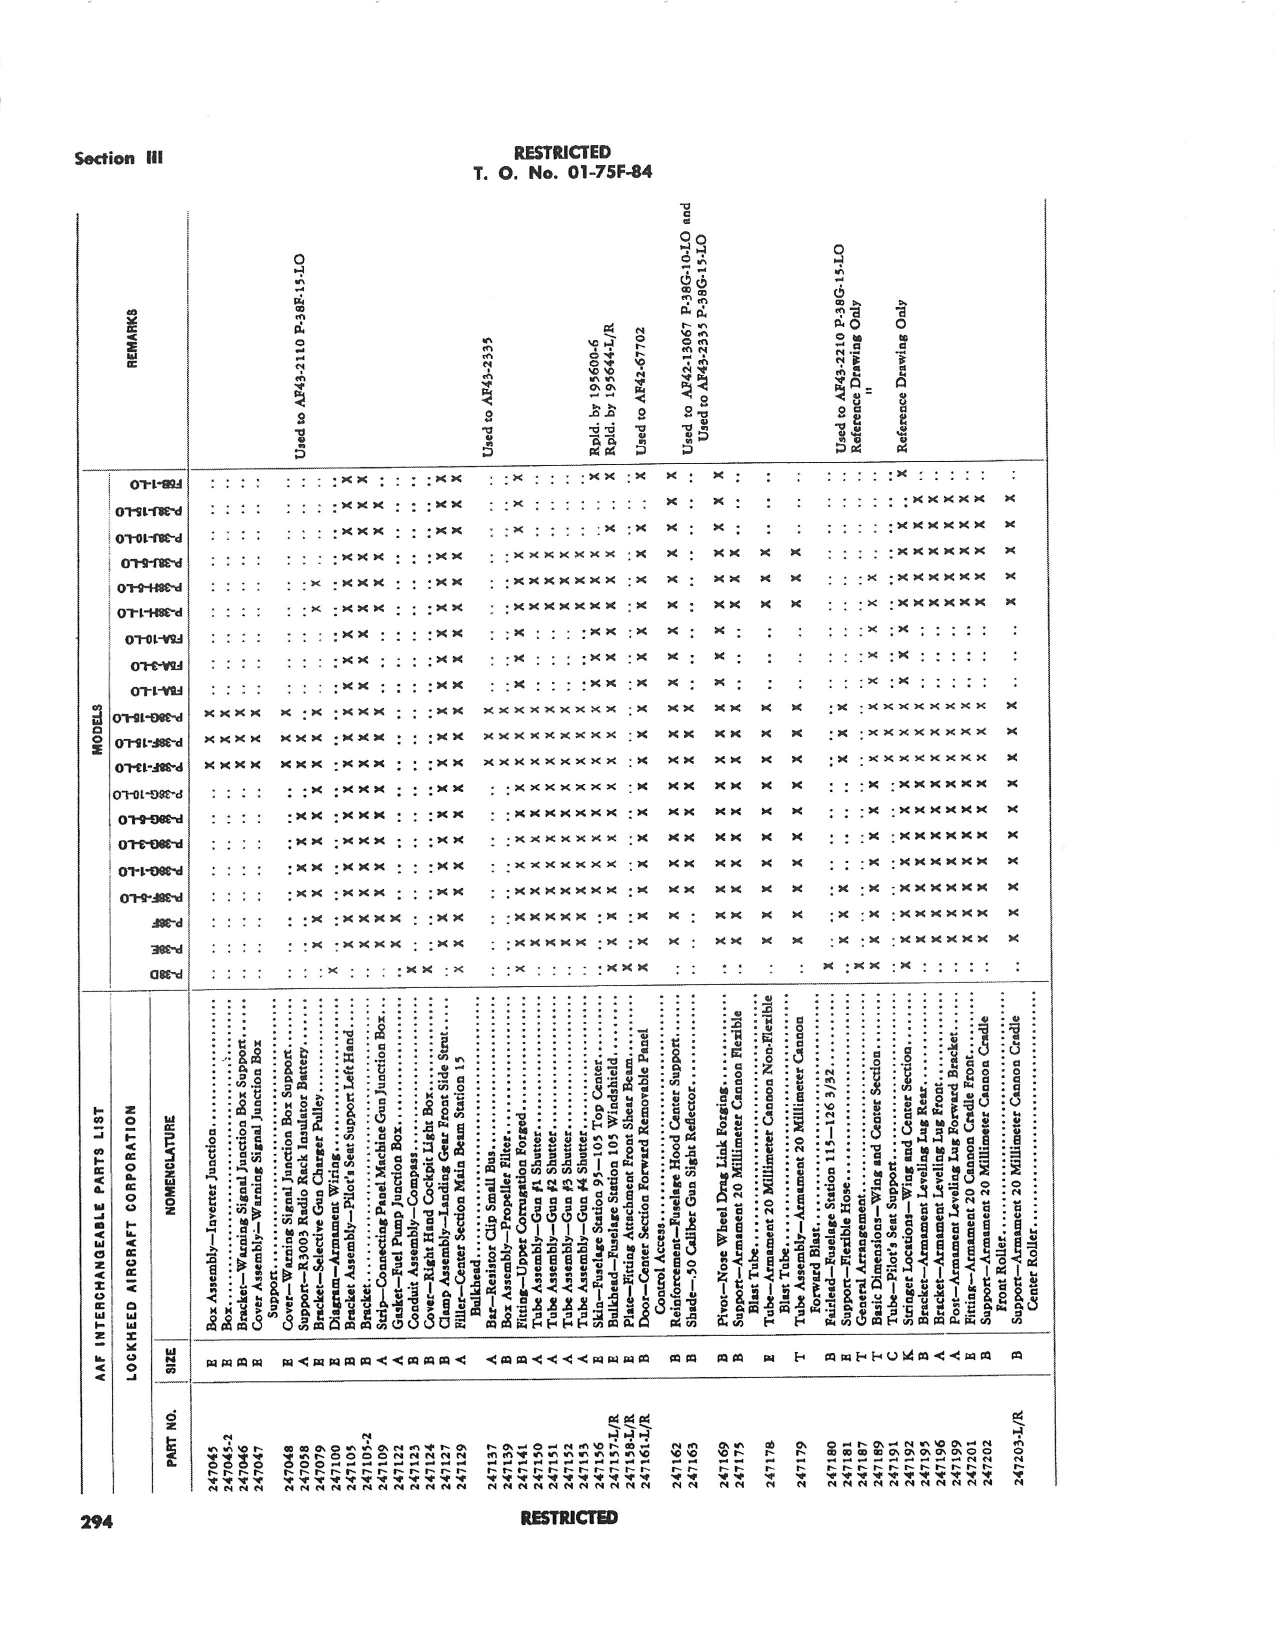 Sample page 296 from AirCorps Library document: Interchangeable Parts List - P-38